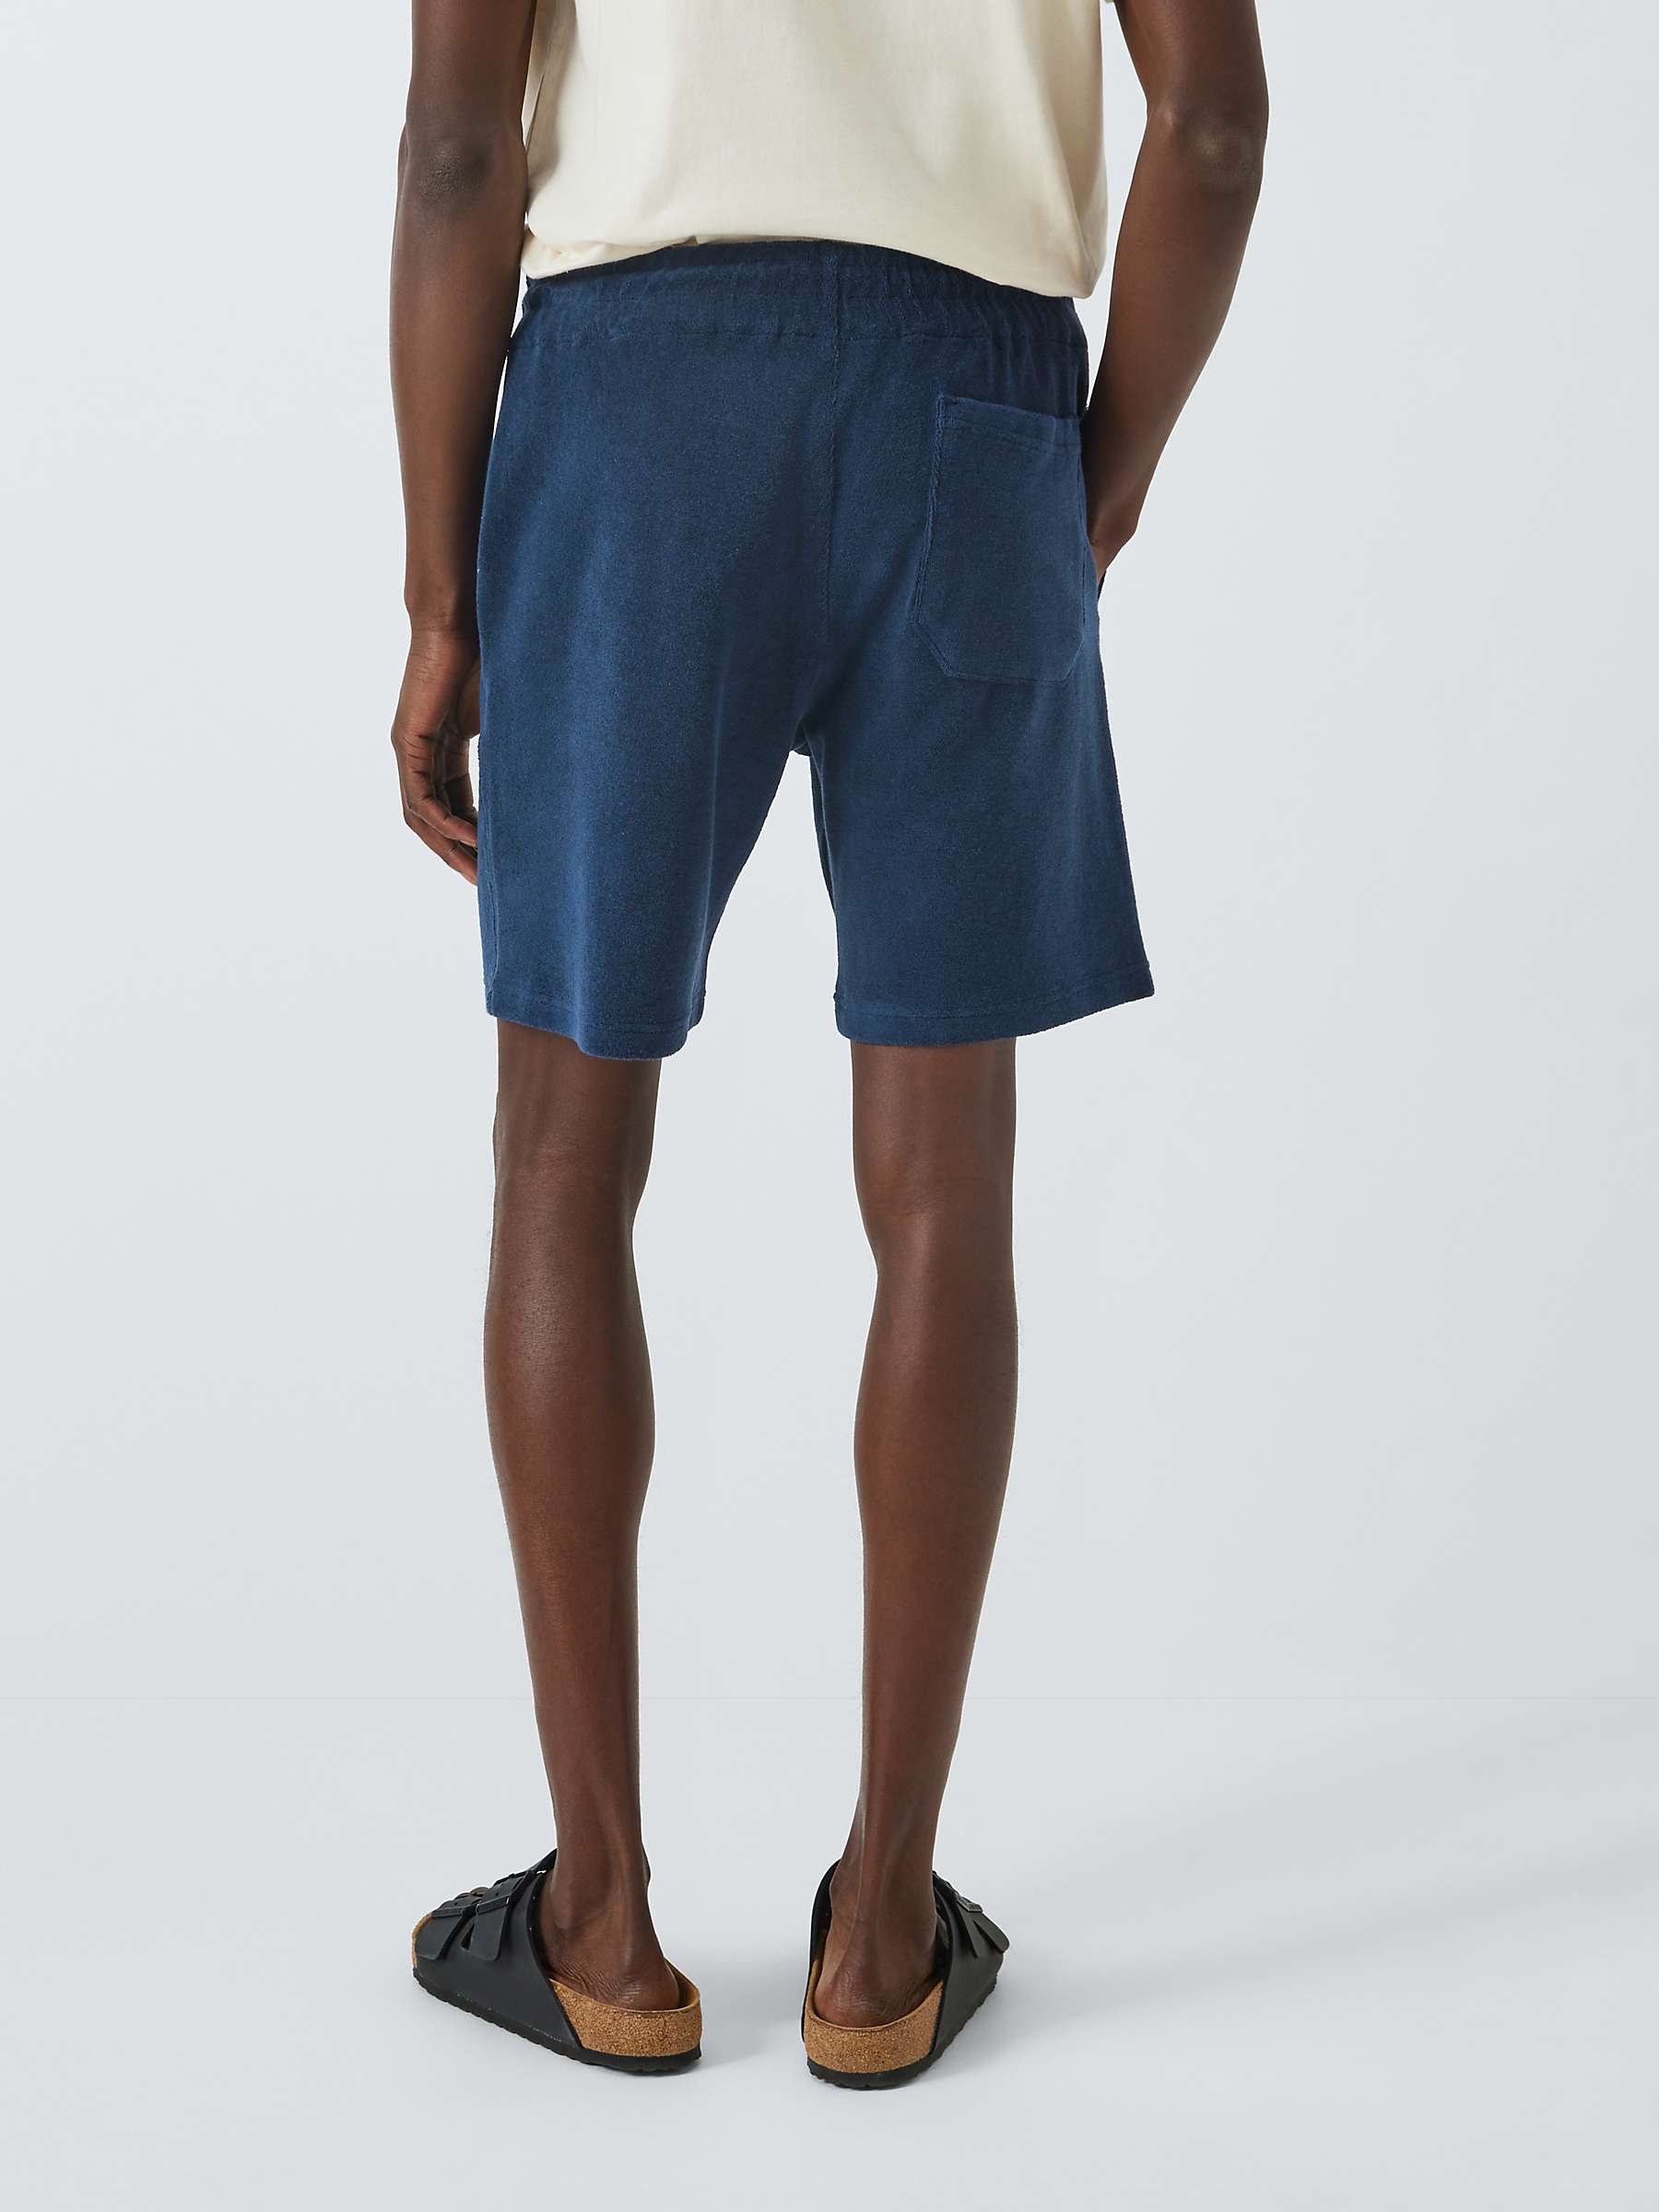 Buy Armor Lux Comfy Terry Heritage Shorts, Navy Online at johnlewis.com